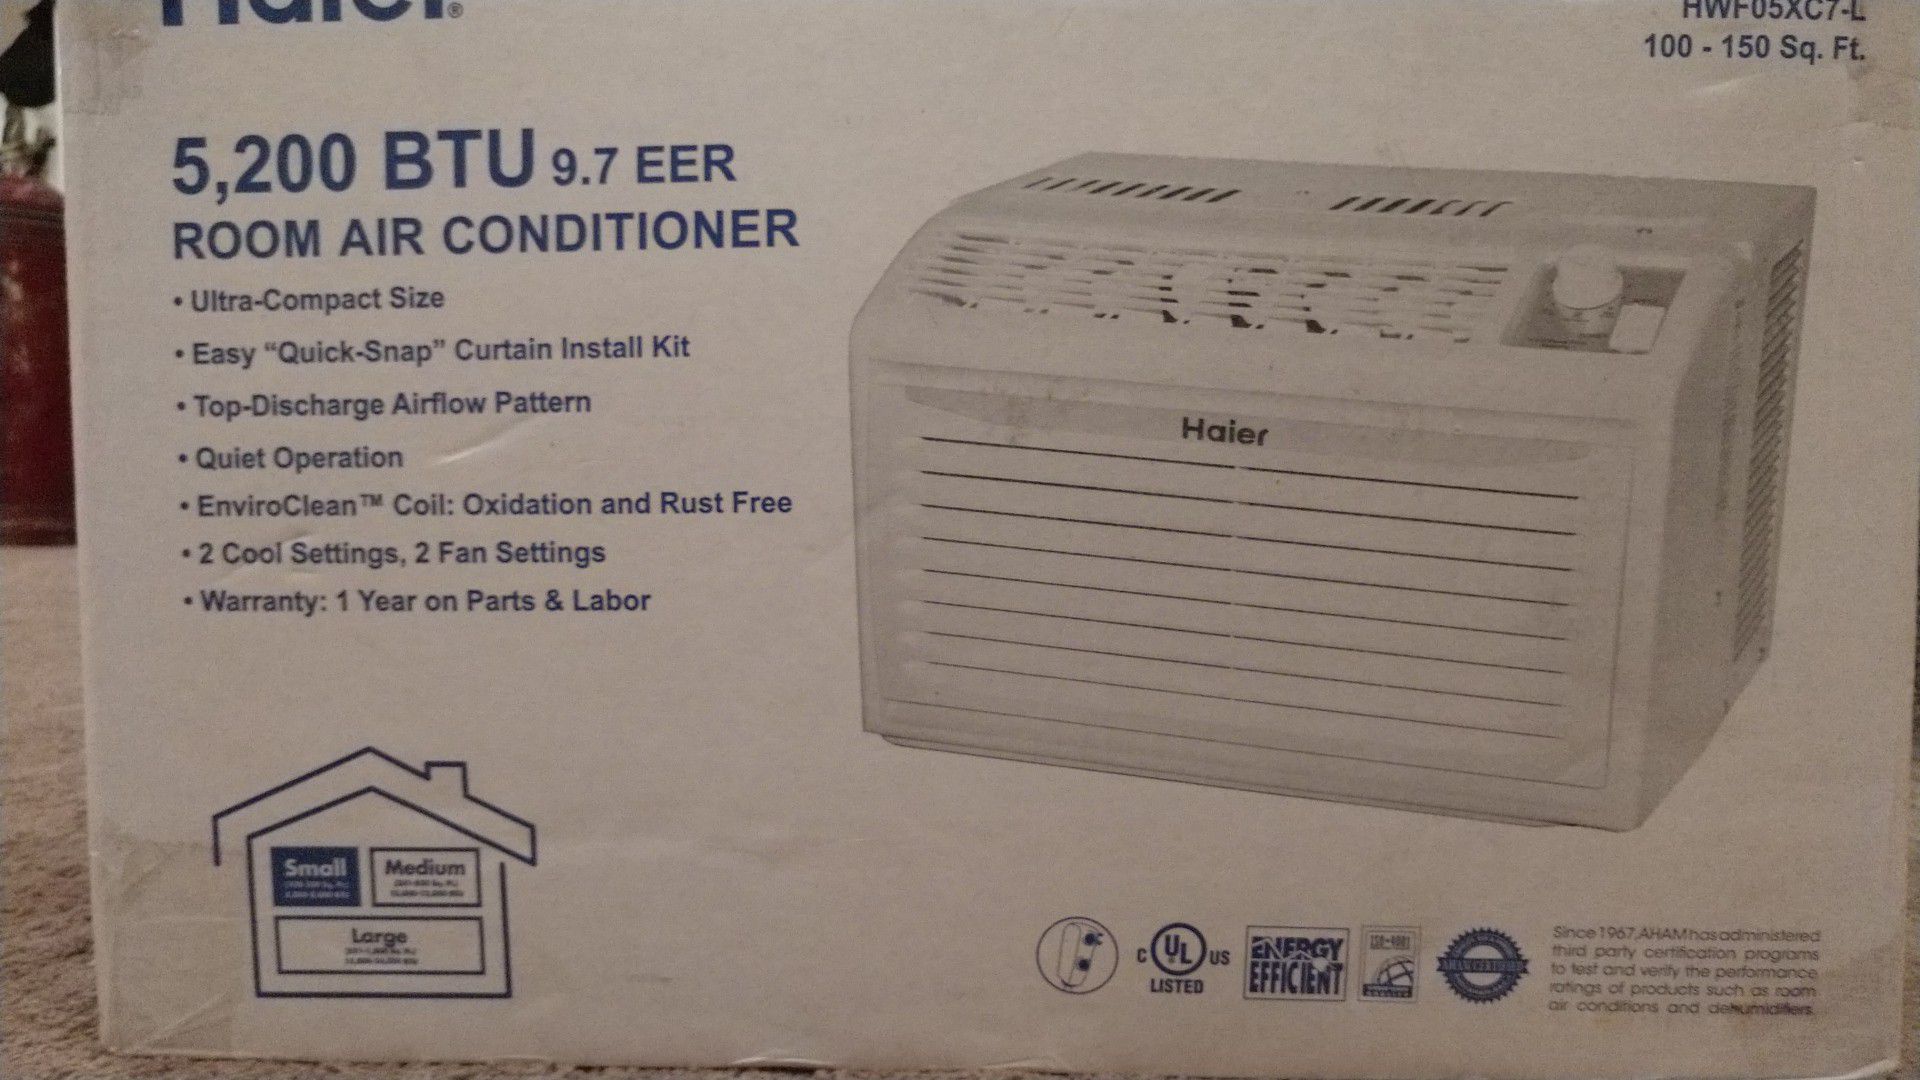 Brand new window air conditioner. Normally $135. Box is open but it didn't fit my window.